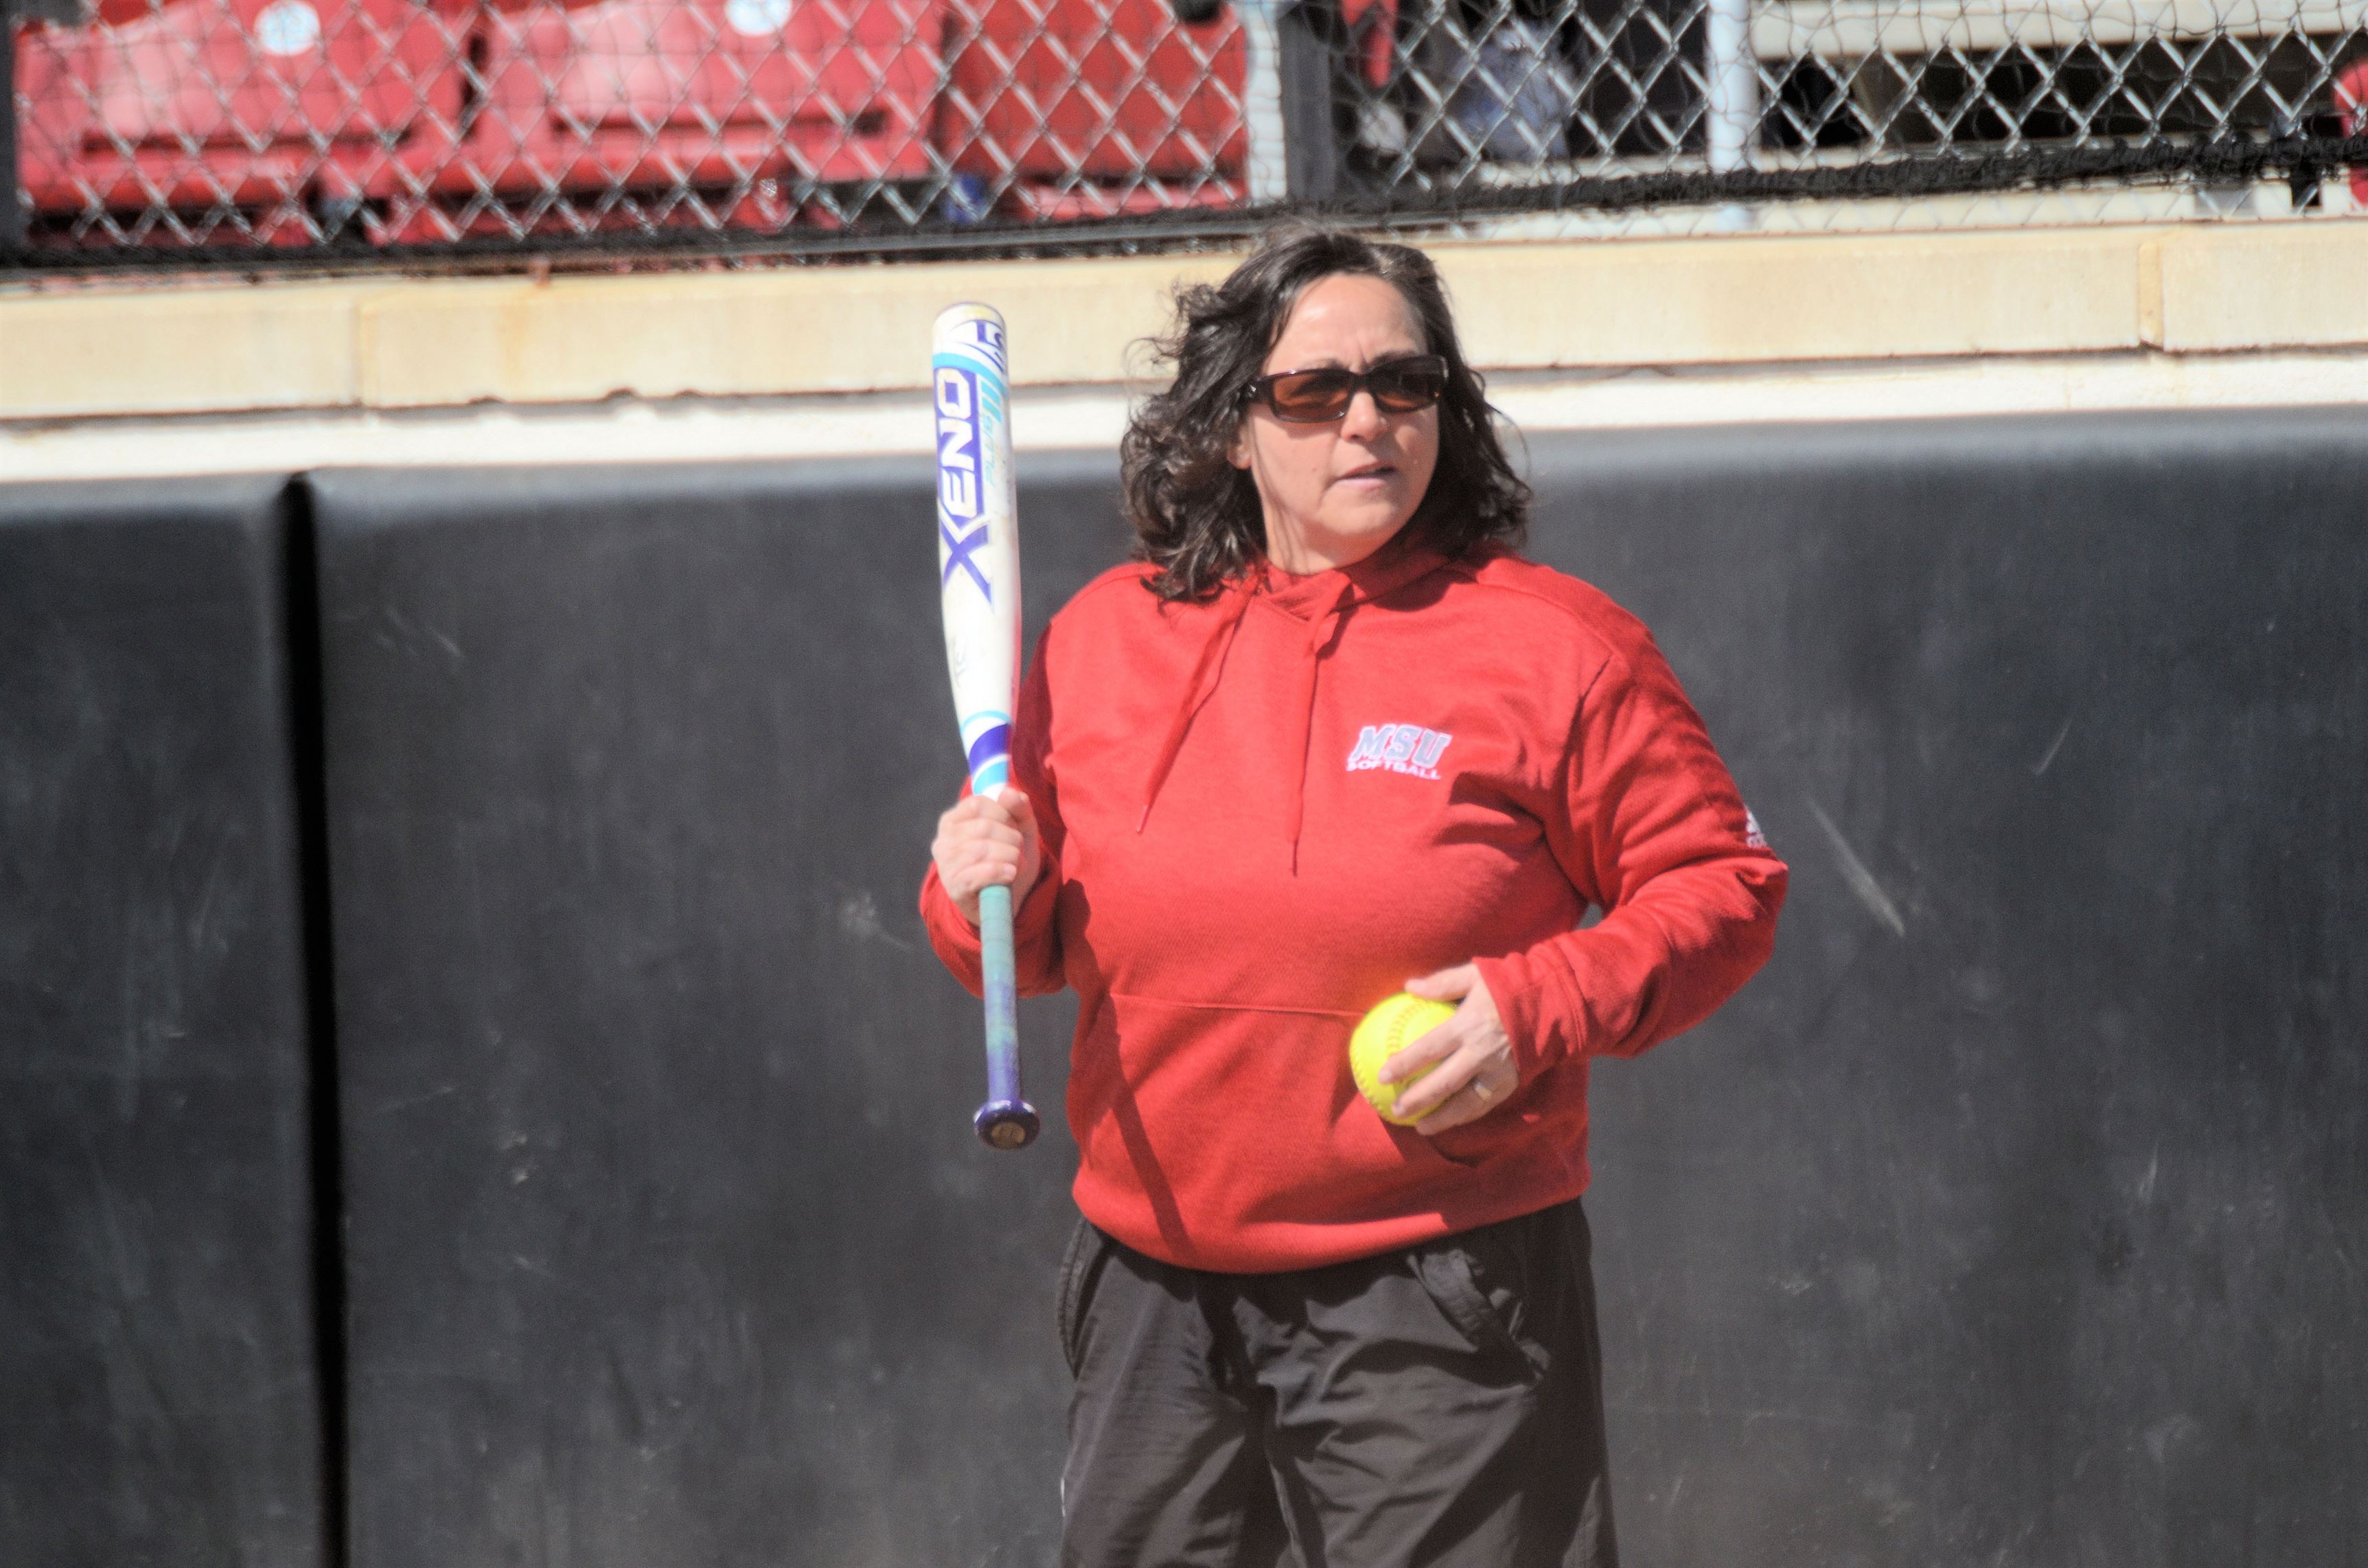 Anita Kubicka has amassed over 900 wins as head coach of the softball team. Photo courtsey of Montclair State Athletics